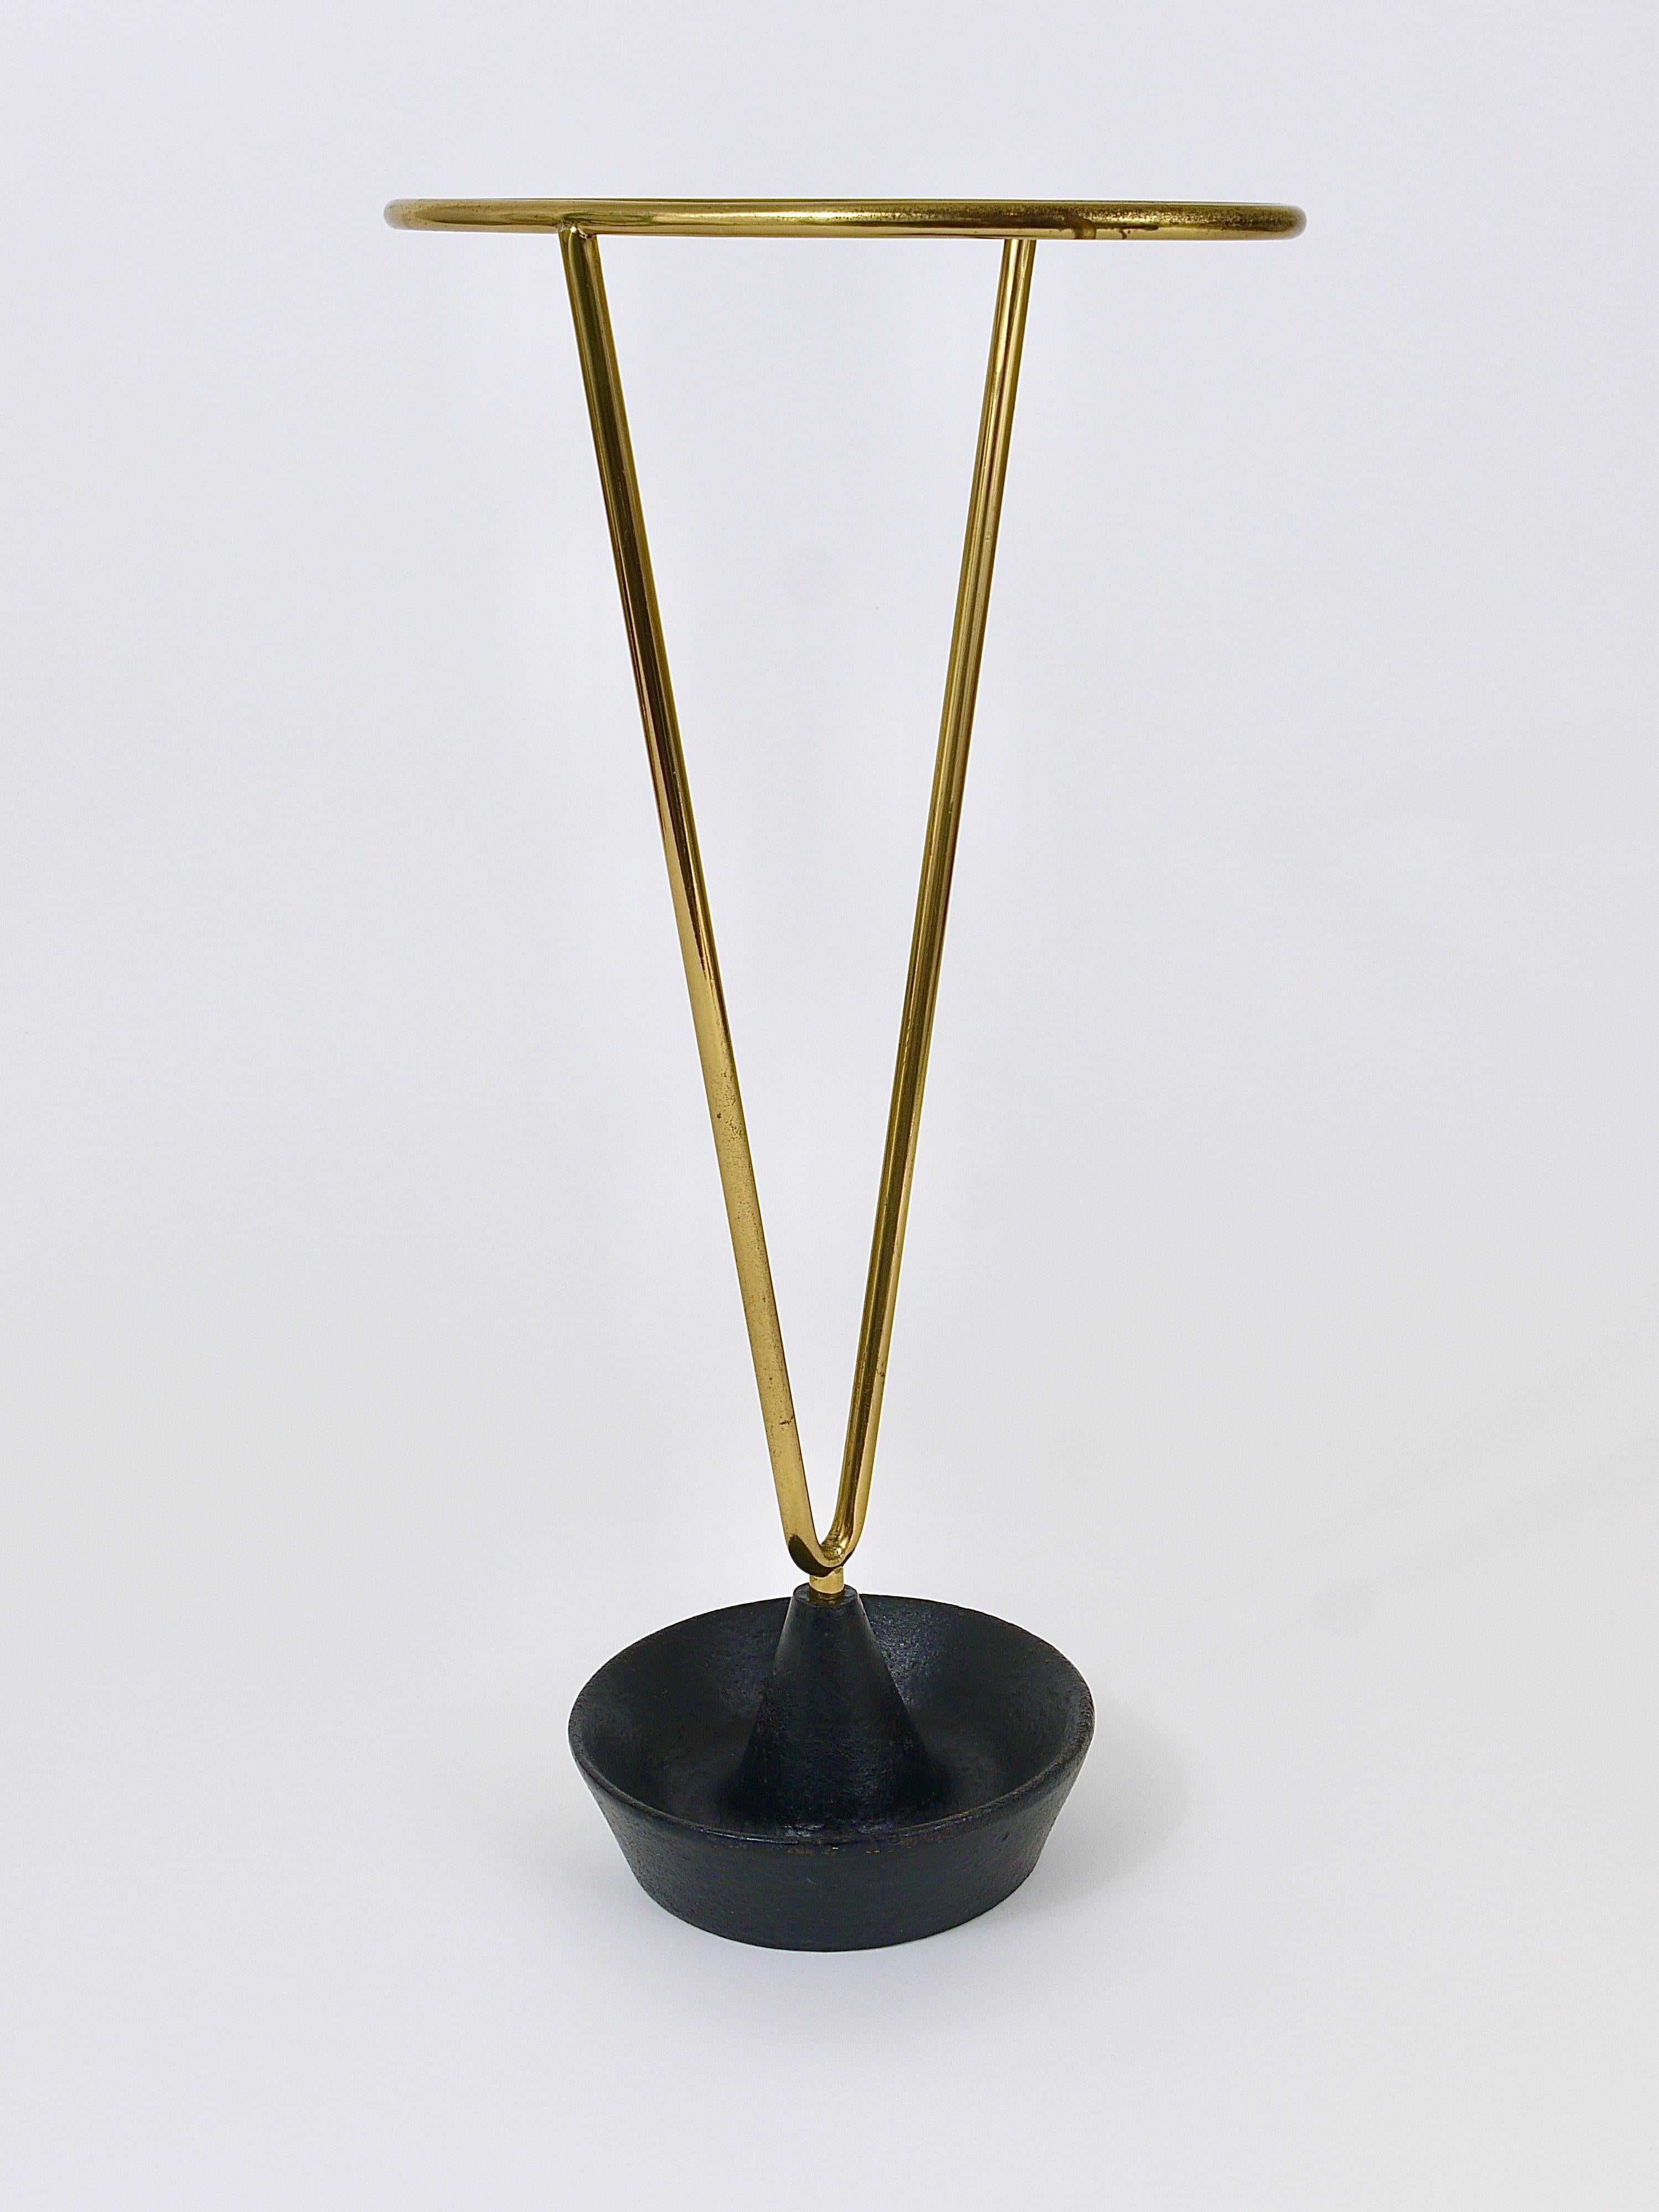 Carl Auböck Mid-Century Brass and Cast Iron Umbrella Stand, Austria, 1950s For Sale 2